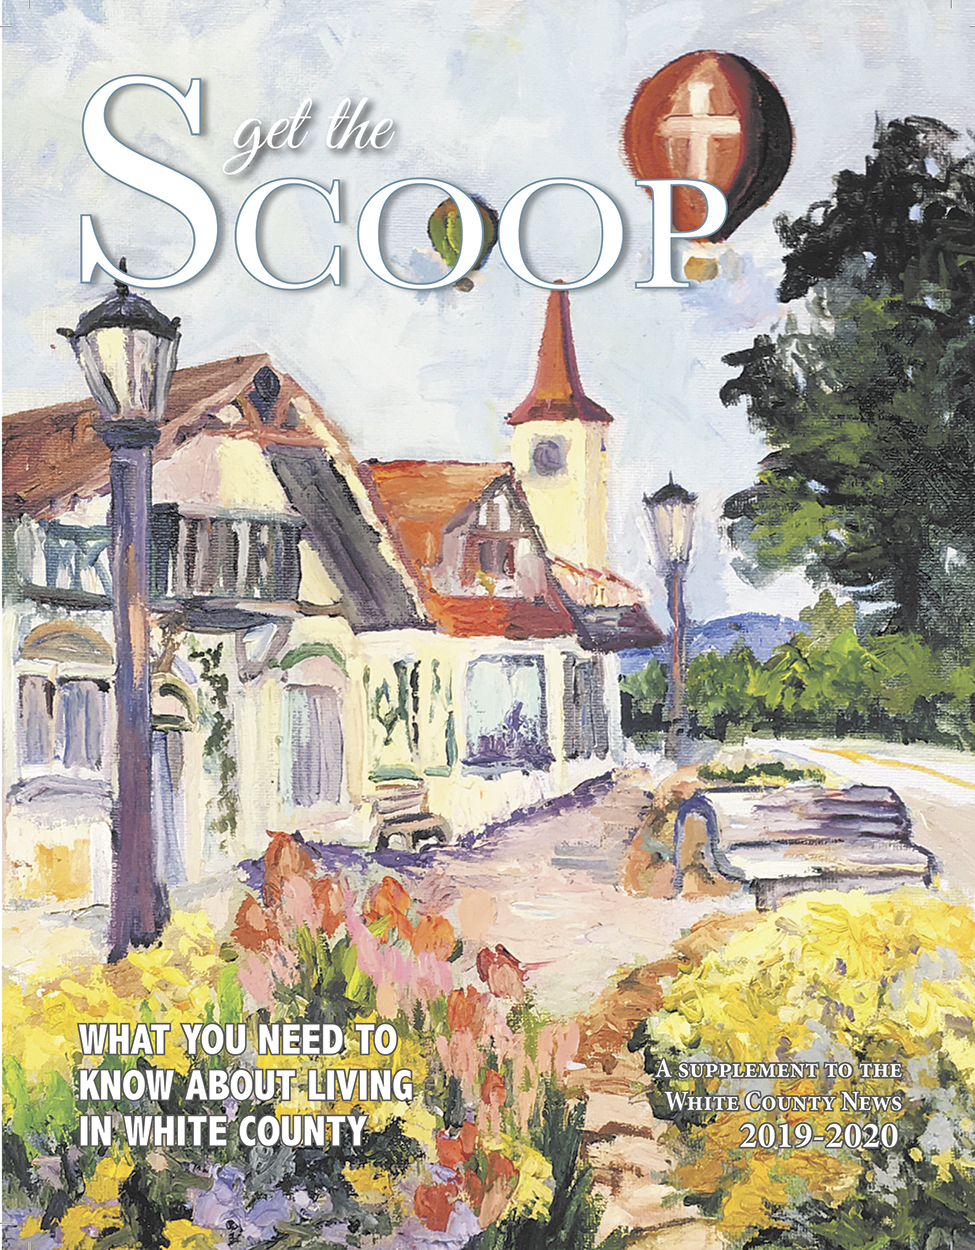 Get the Scoop will be published in March and distributed throughout the community.